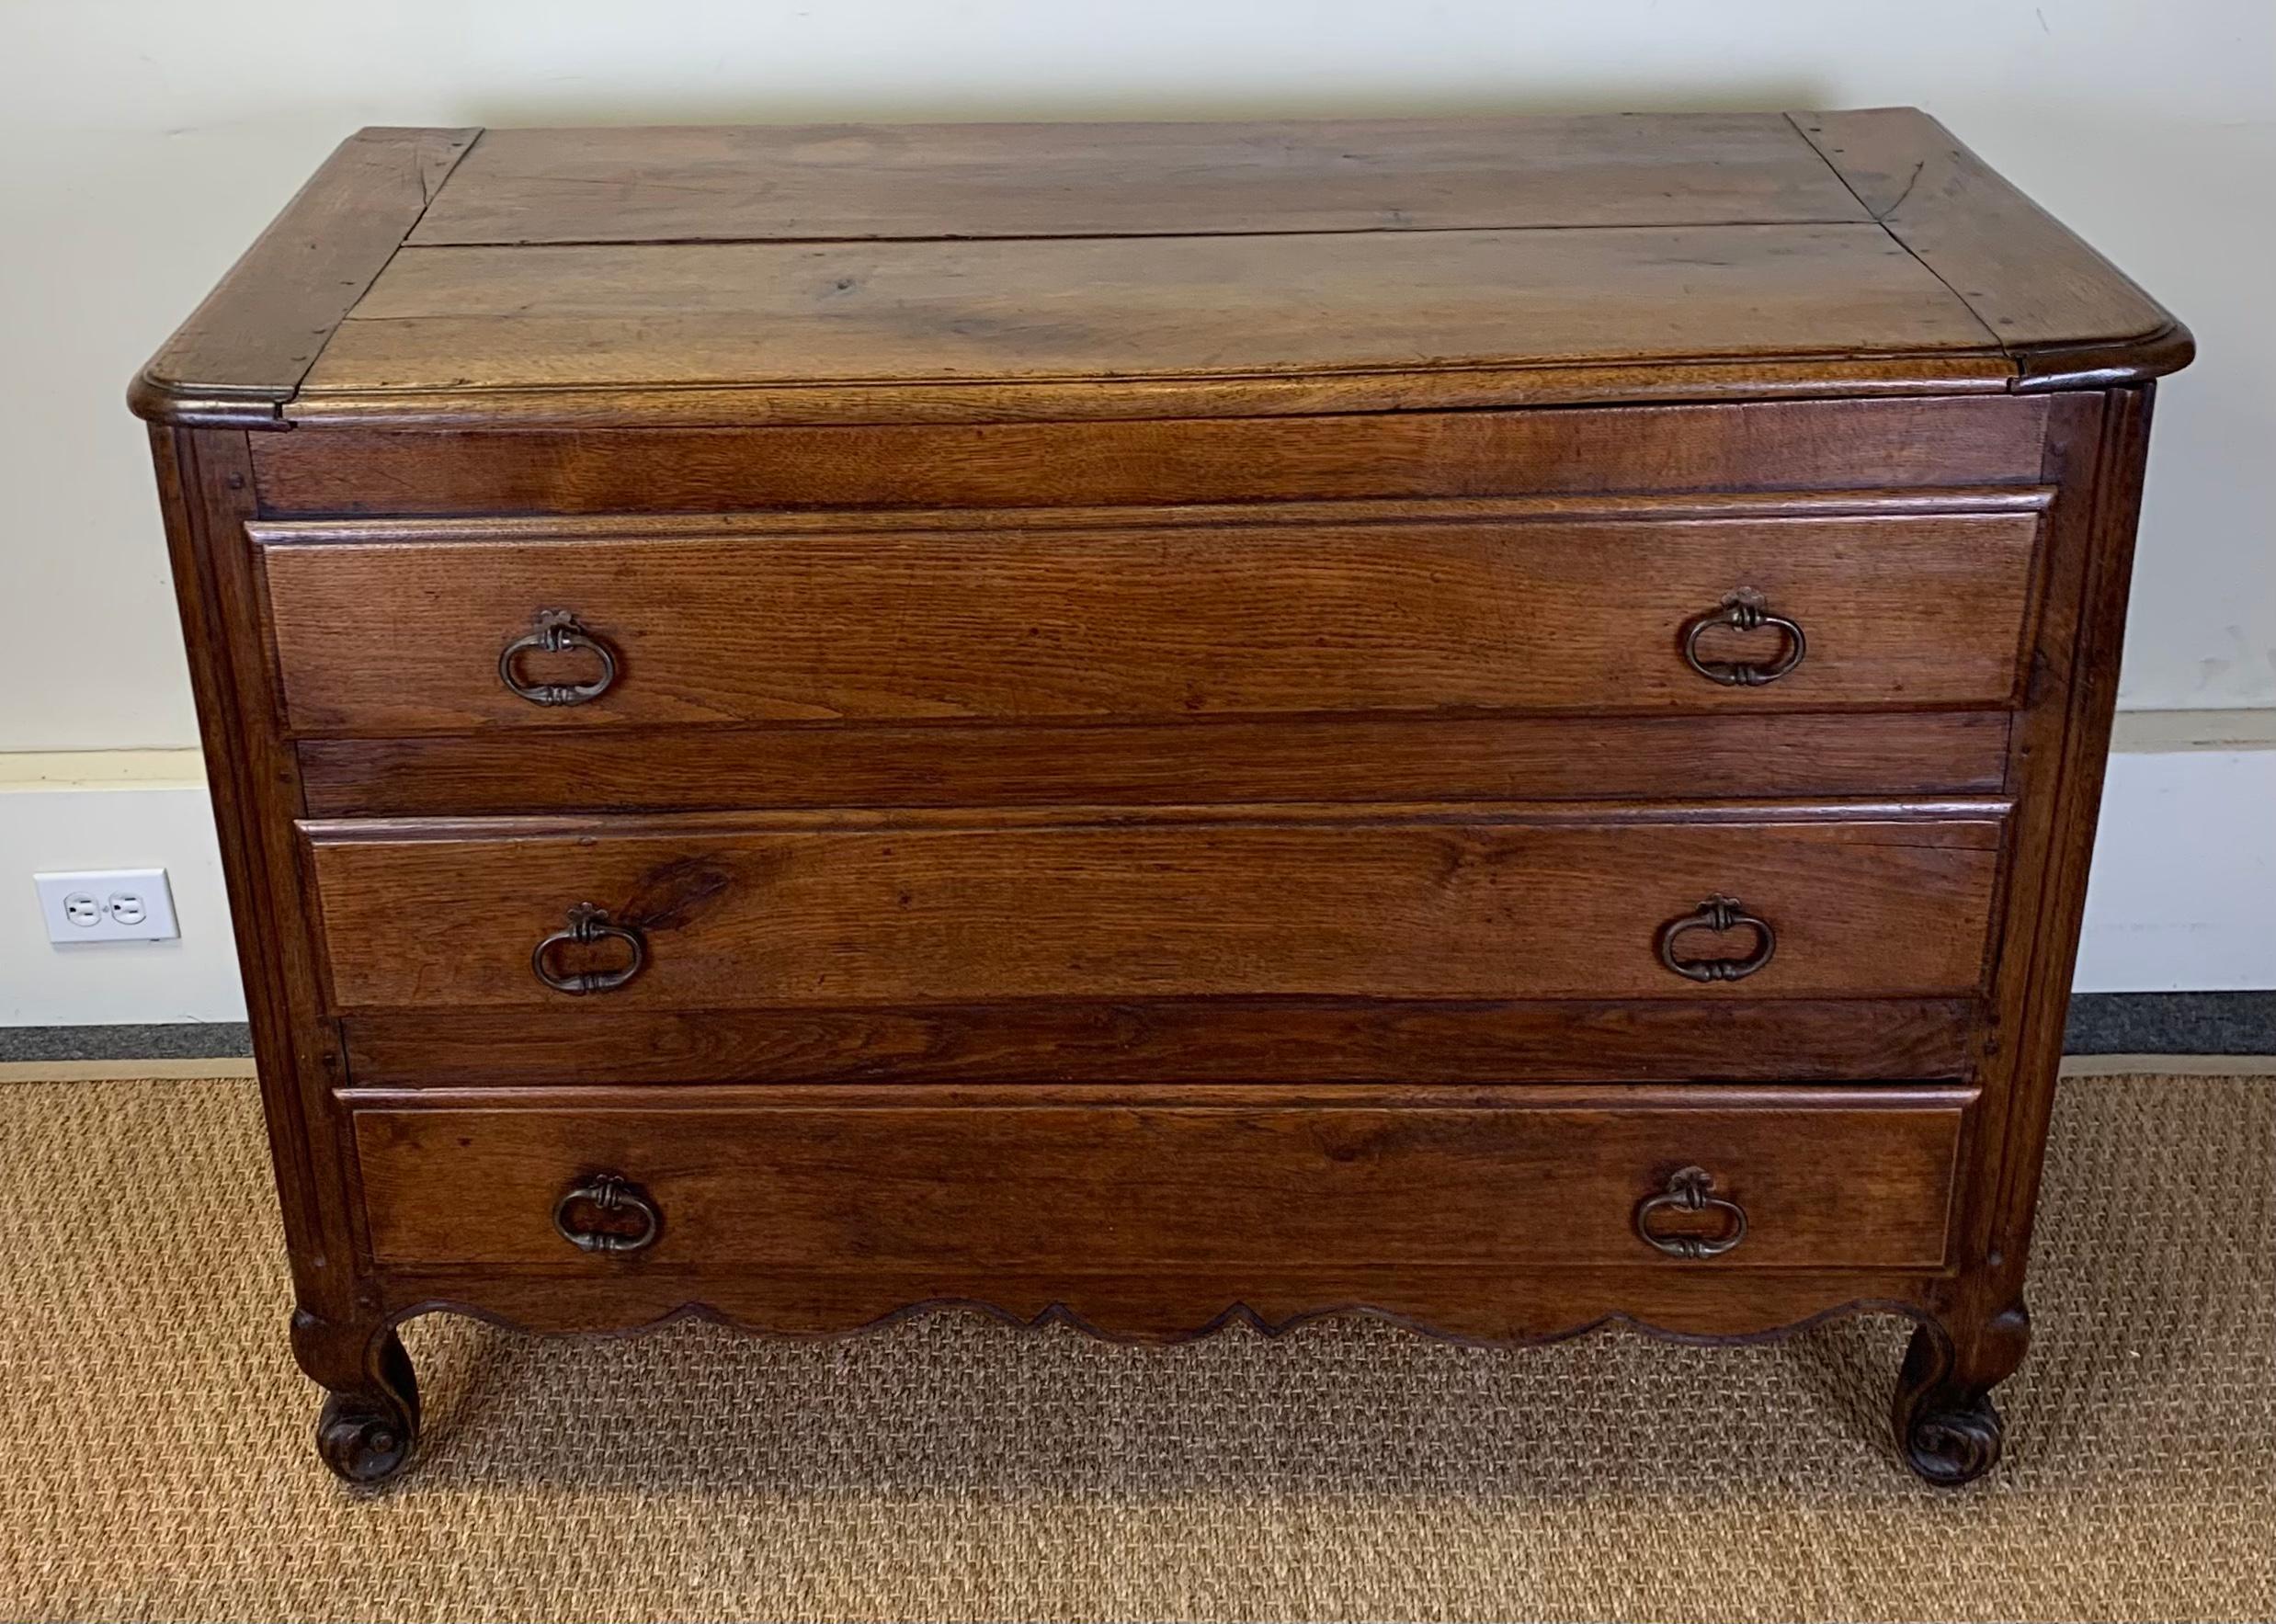 French Provincial Late 18th Century French Blanket Chest